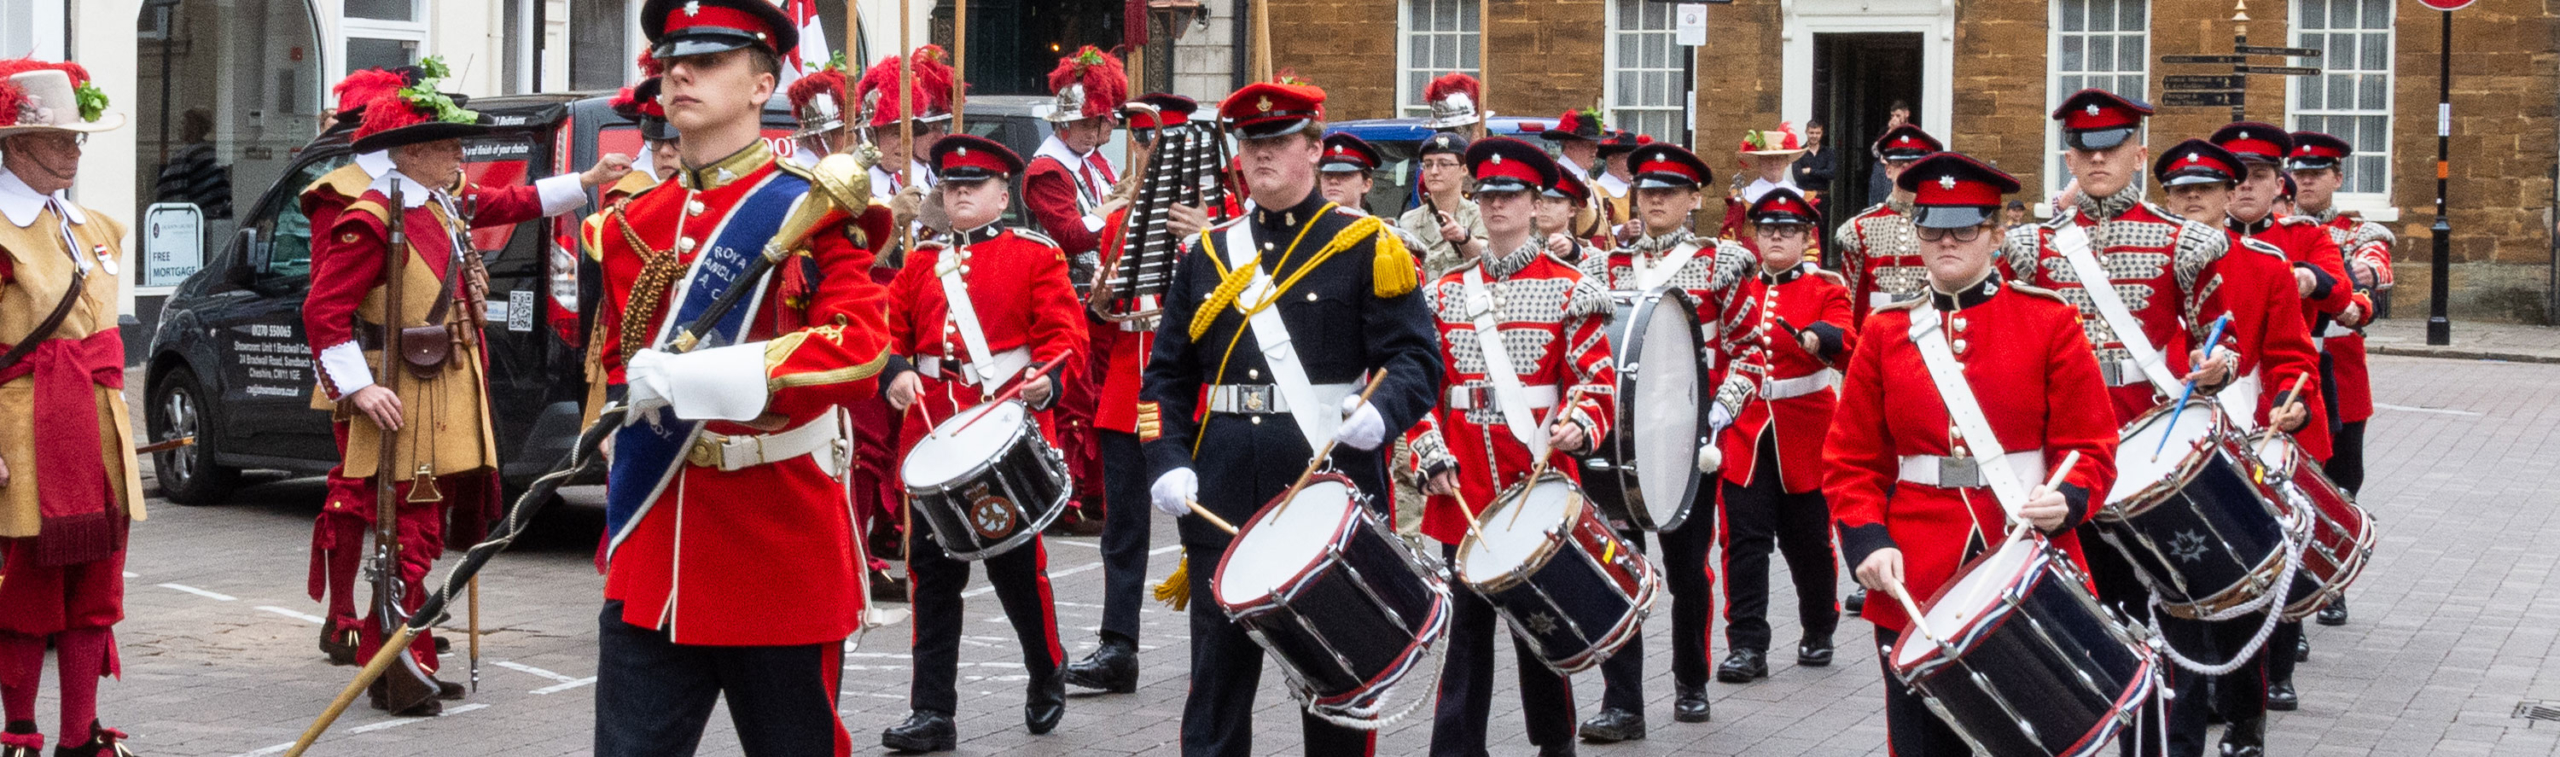 Marching Band of Cadets Northamptonshire